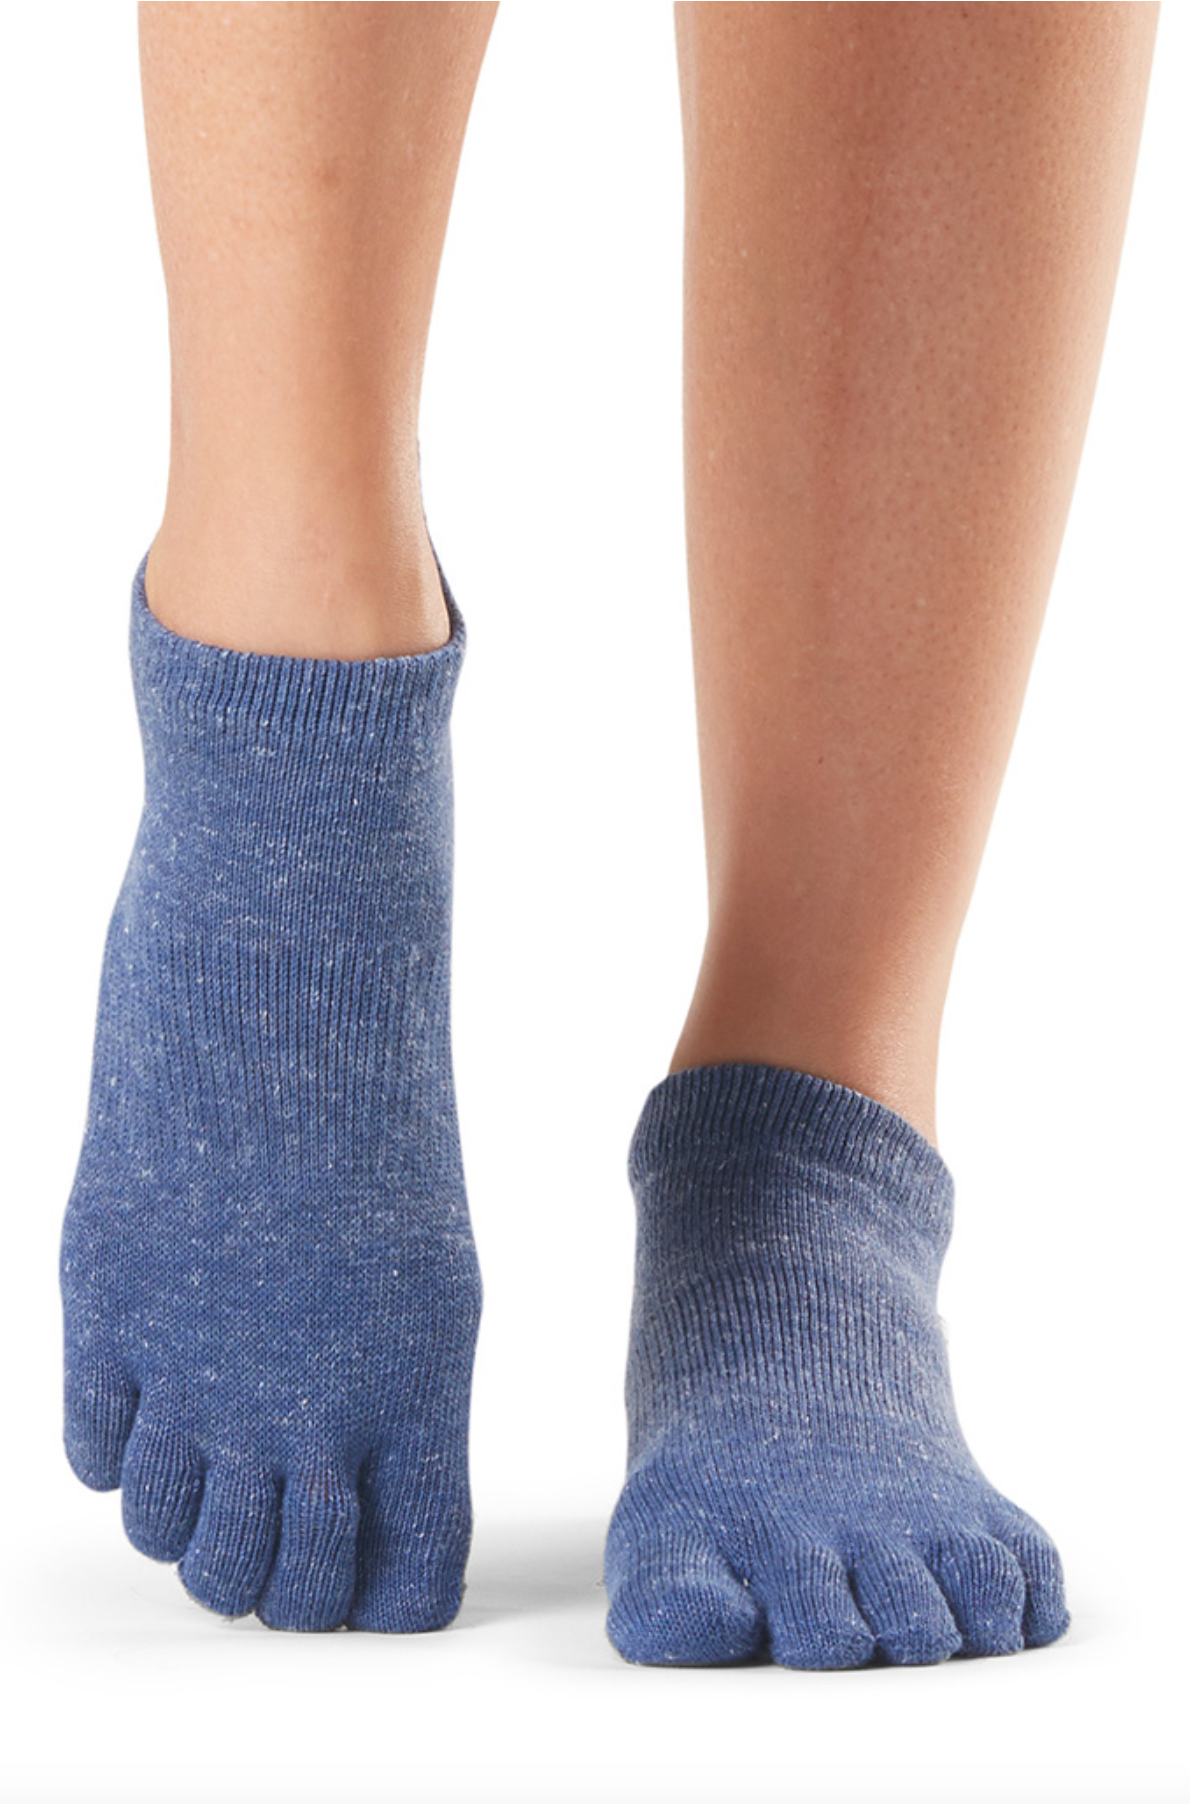 ToeSox Low Rise Full toe - light fleck navy blue toe socks with gripper sole, perfect for pilates and yoga